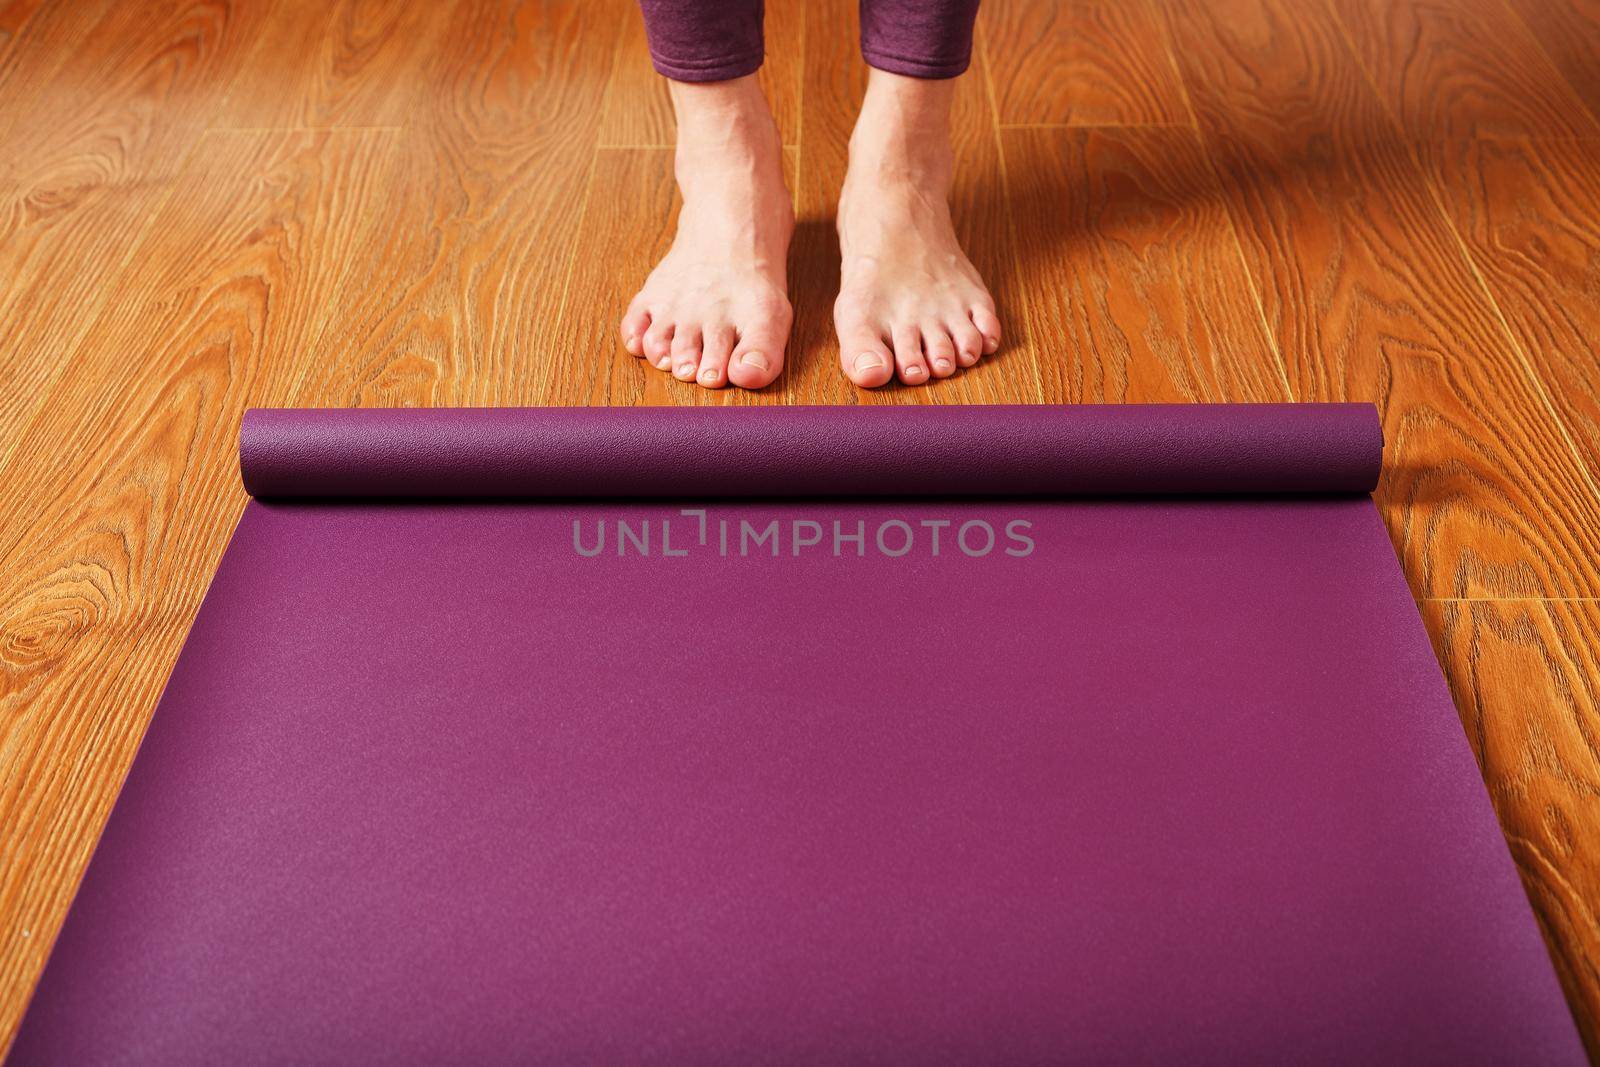 The girl's feet stand in front of an unfolded Yoga mat on the wooden floor. by AlexGrec